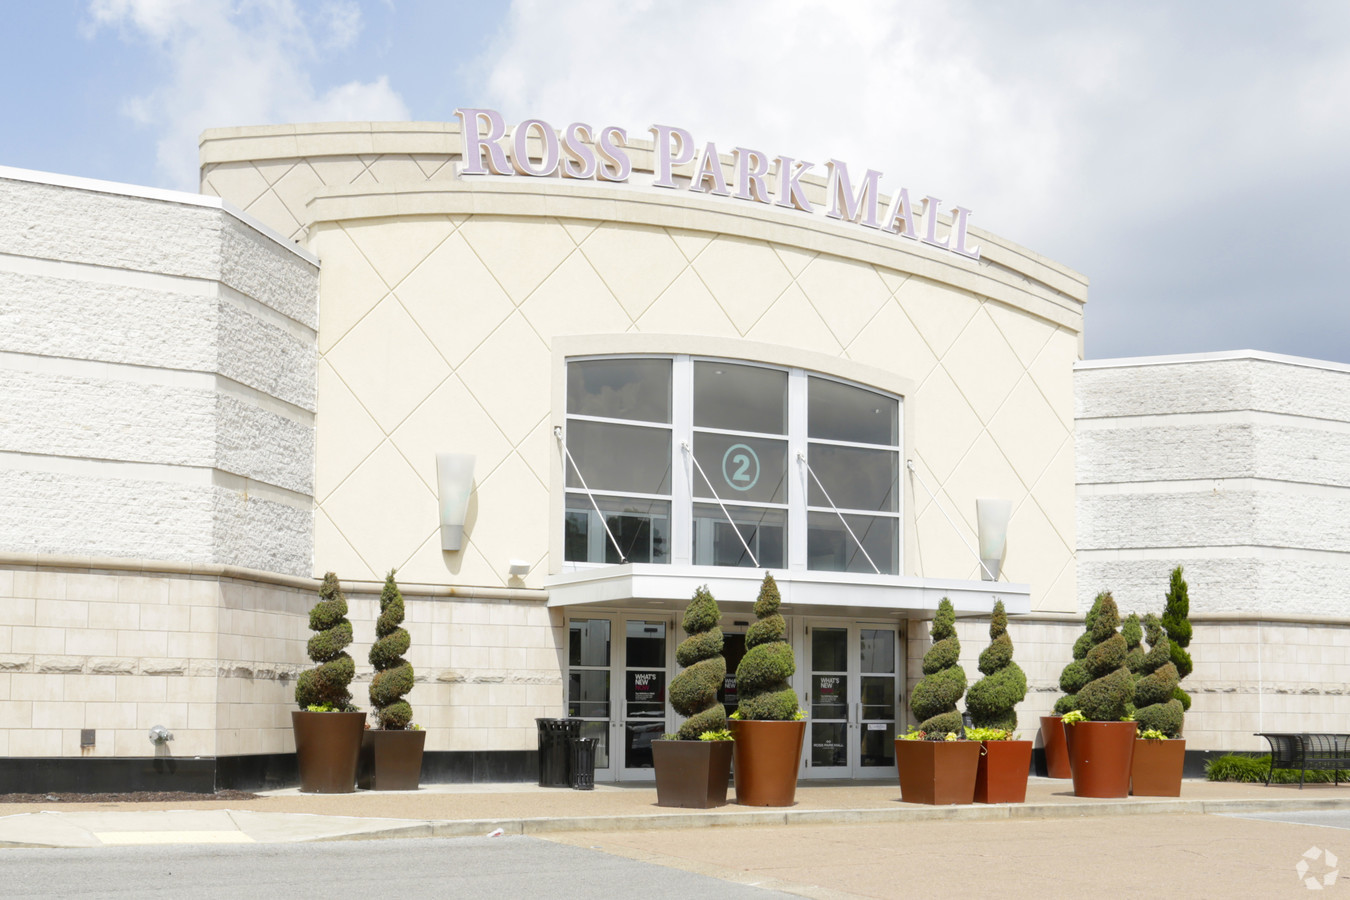 Store Directory for Ross Park Mall - A Shopping Center In Pittsburgh, PA -  A Simon Property